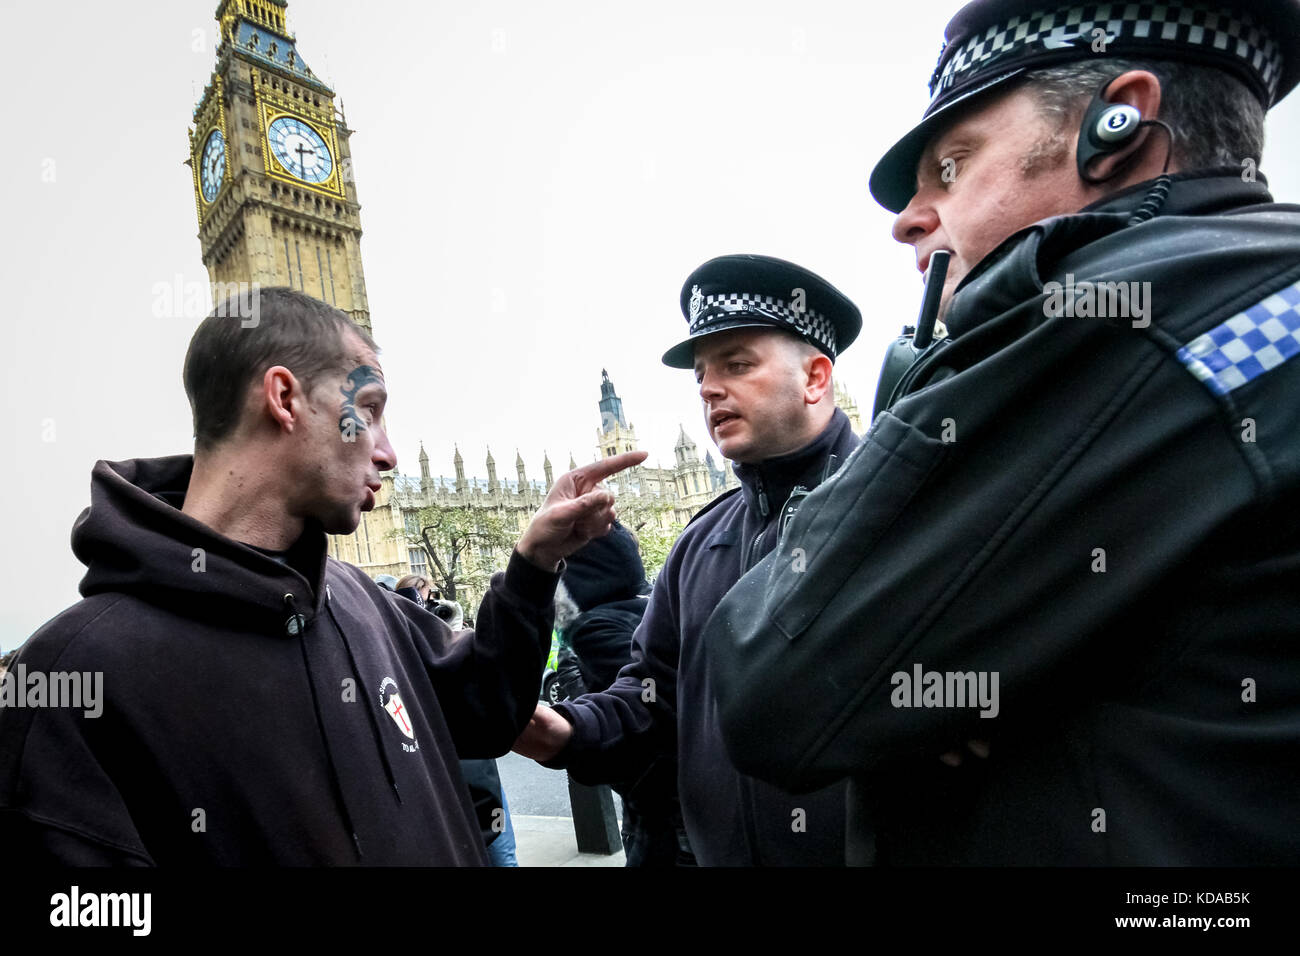 The EDL (English Defence League) protest in Westminster, London, UK. Stock Photo